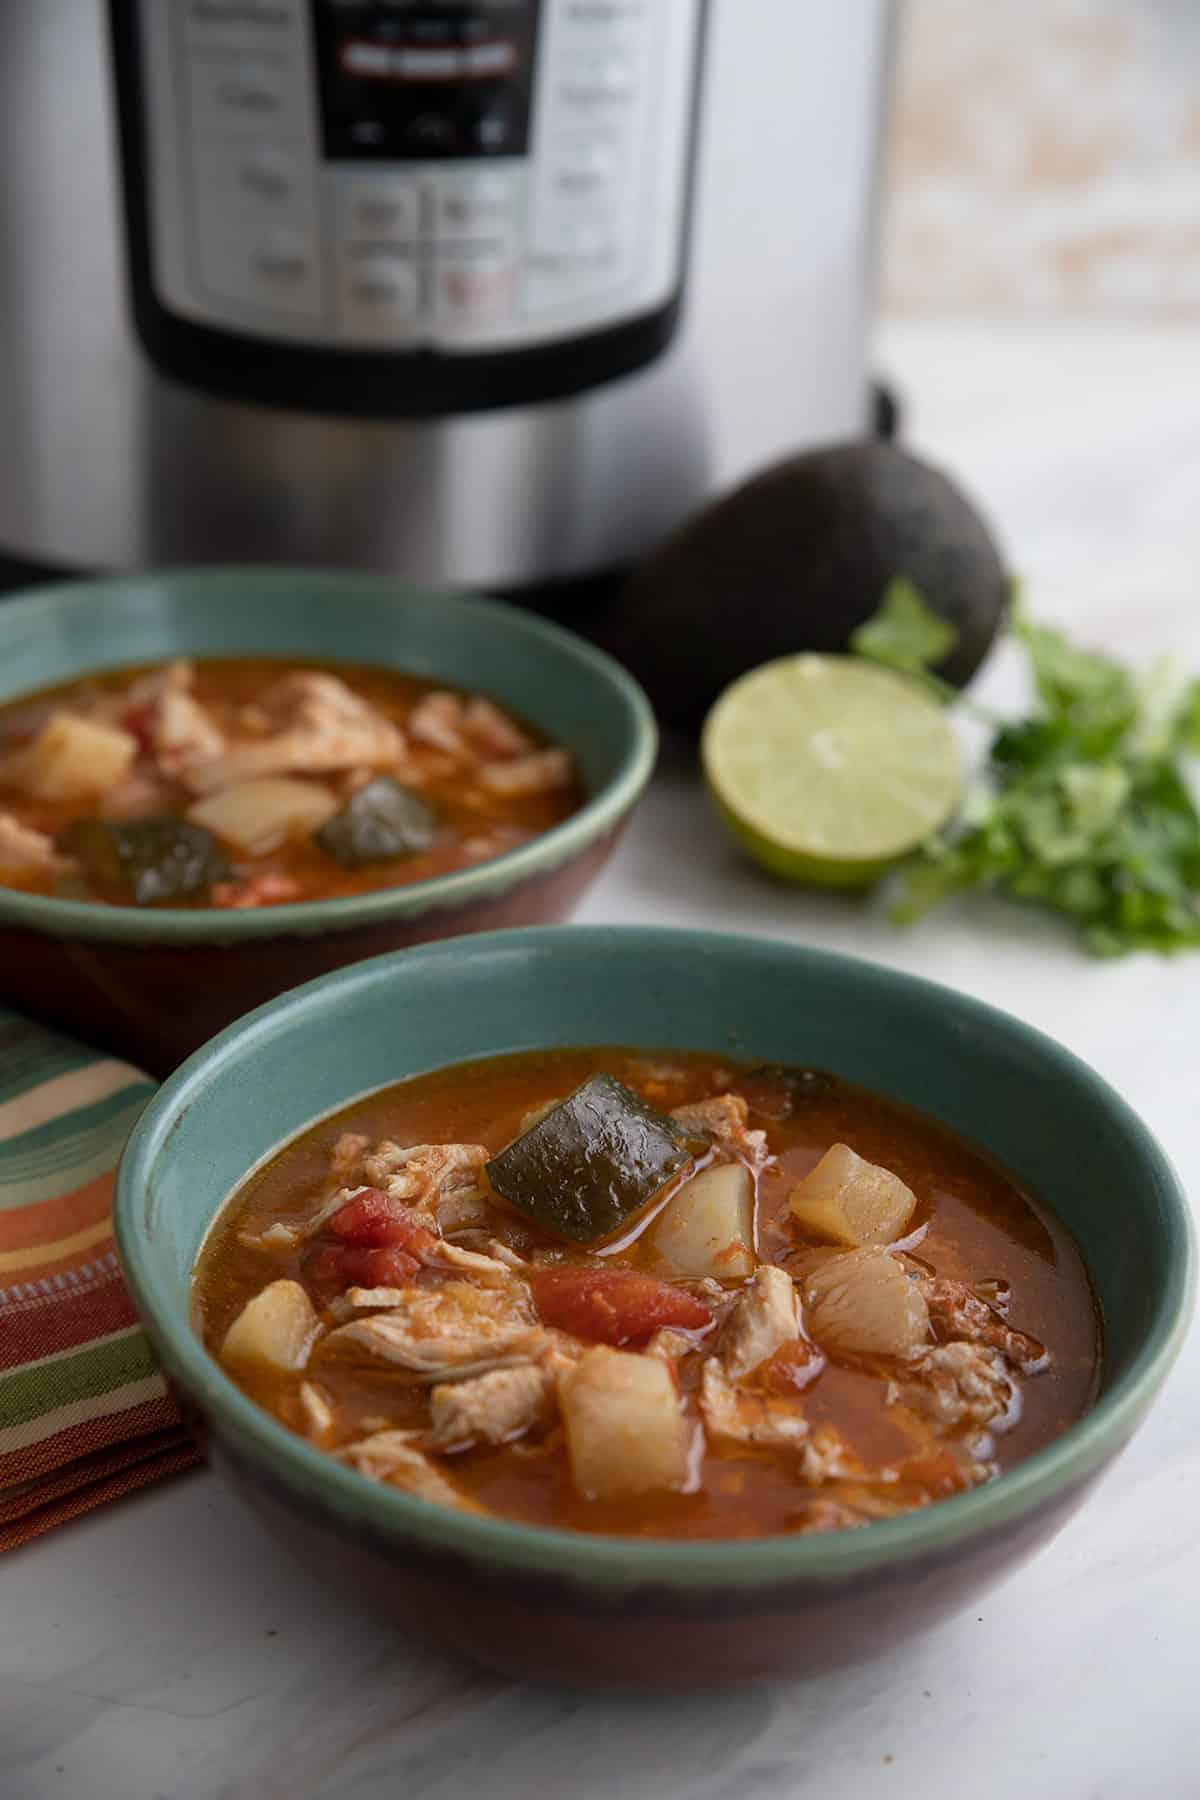 Two bowls of pork stew in front of an Instant Pot.